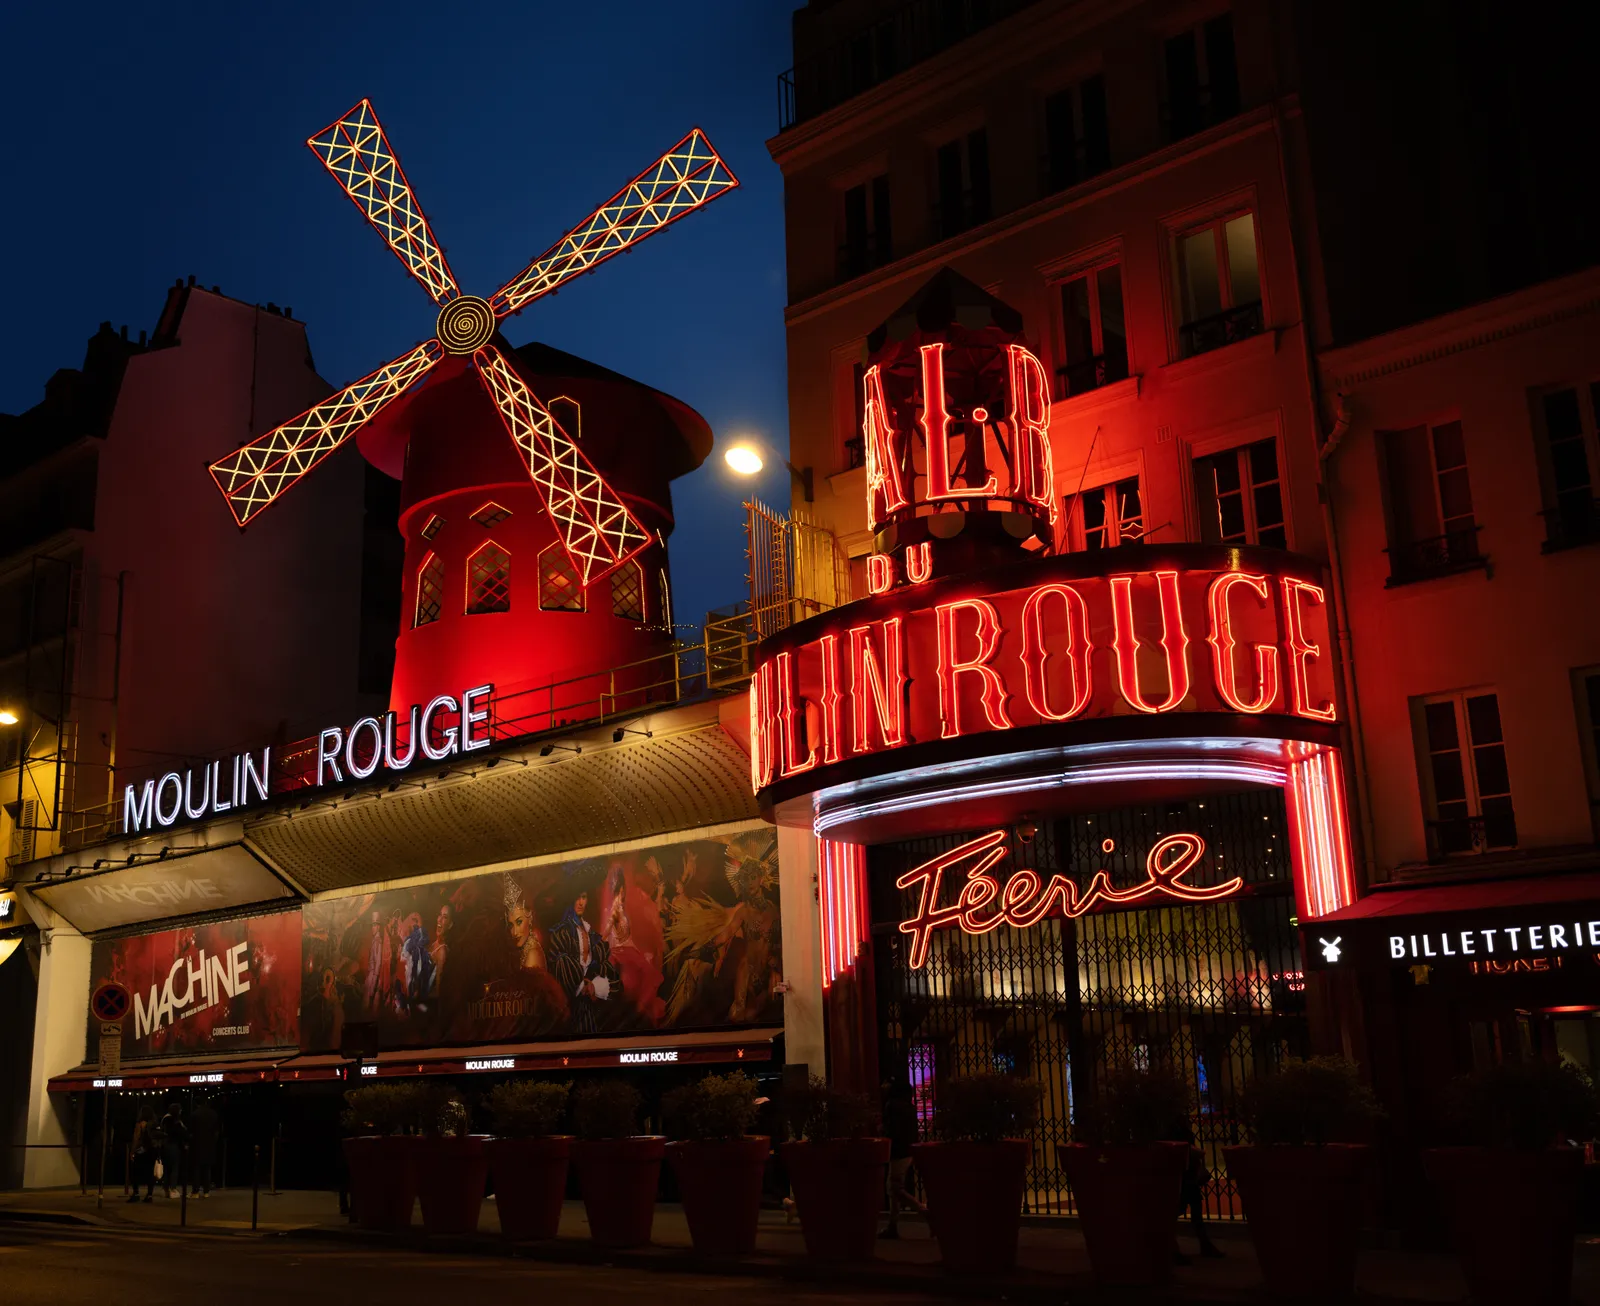 The Windmill That Gave Paris' Moulin Rouge Its Name Is Now an Airbnb—And Is Booking for Just $1 | Smart News| Smithsonian